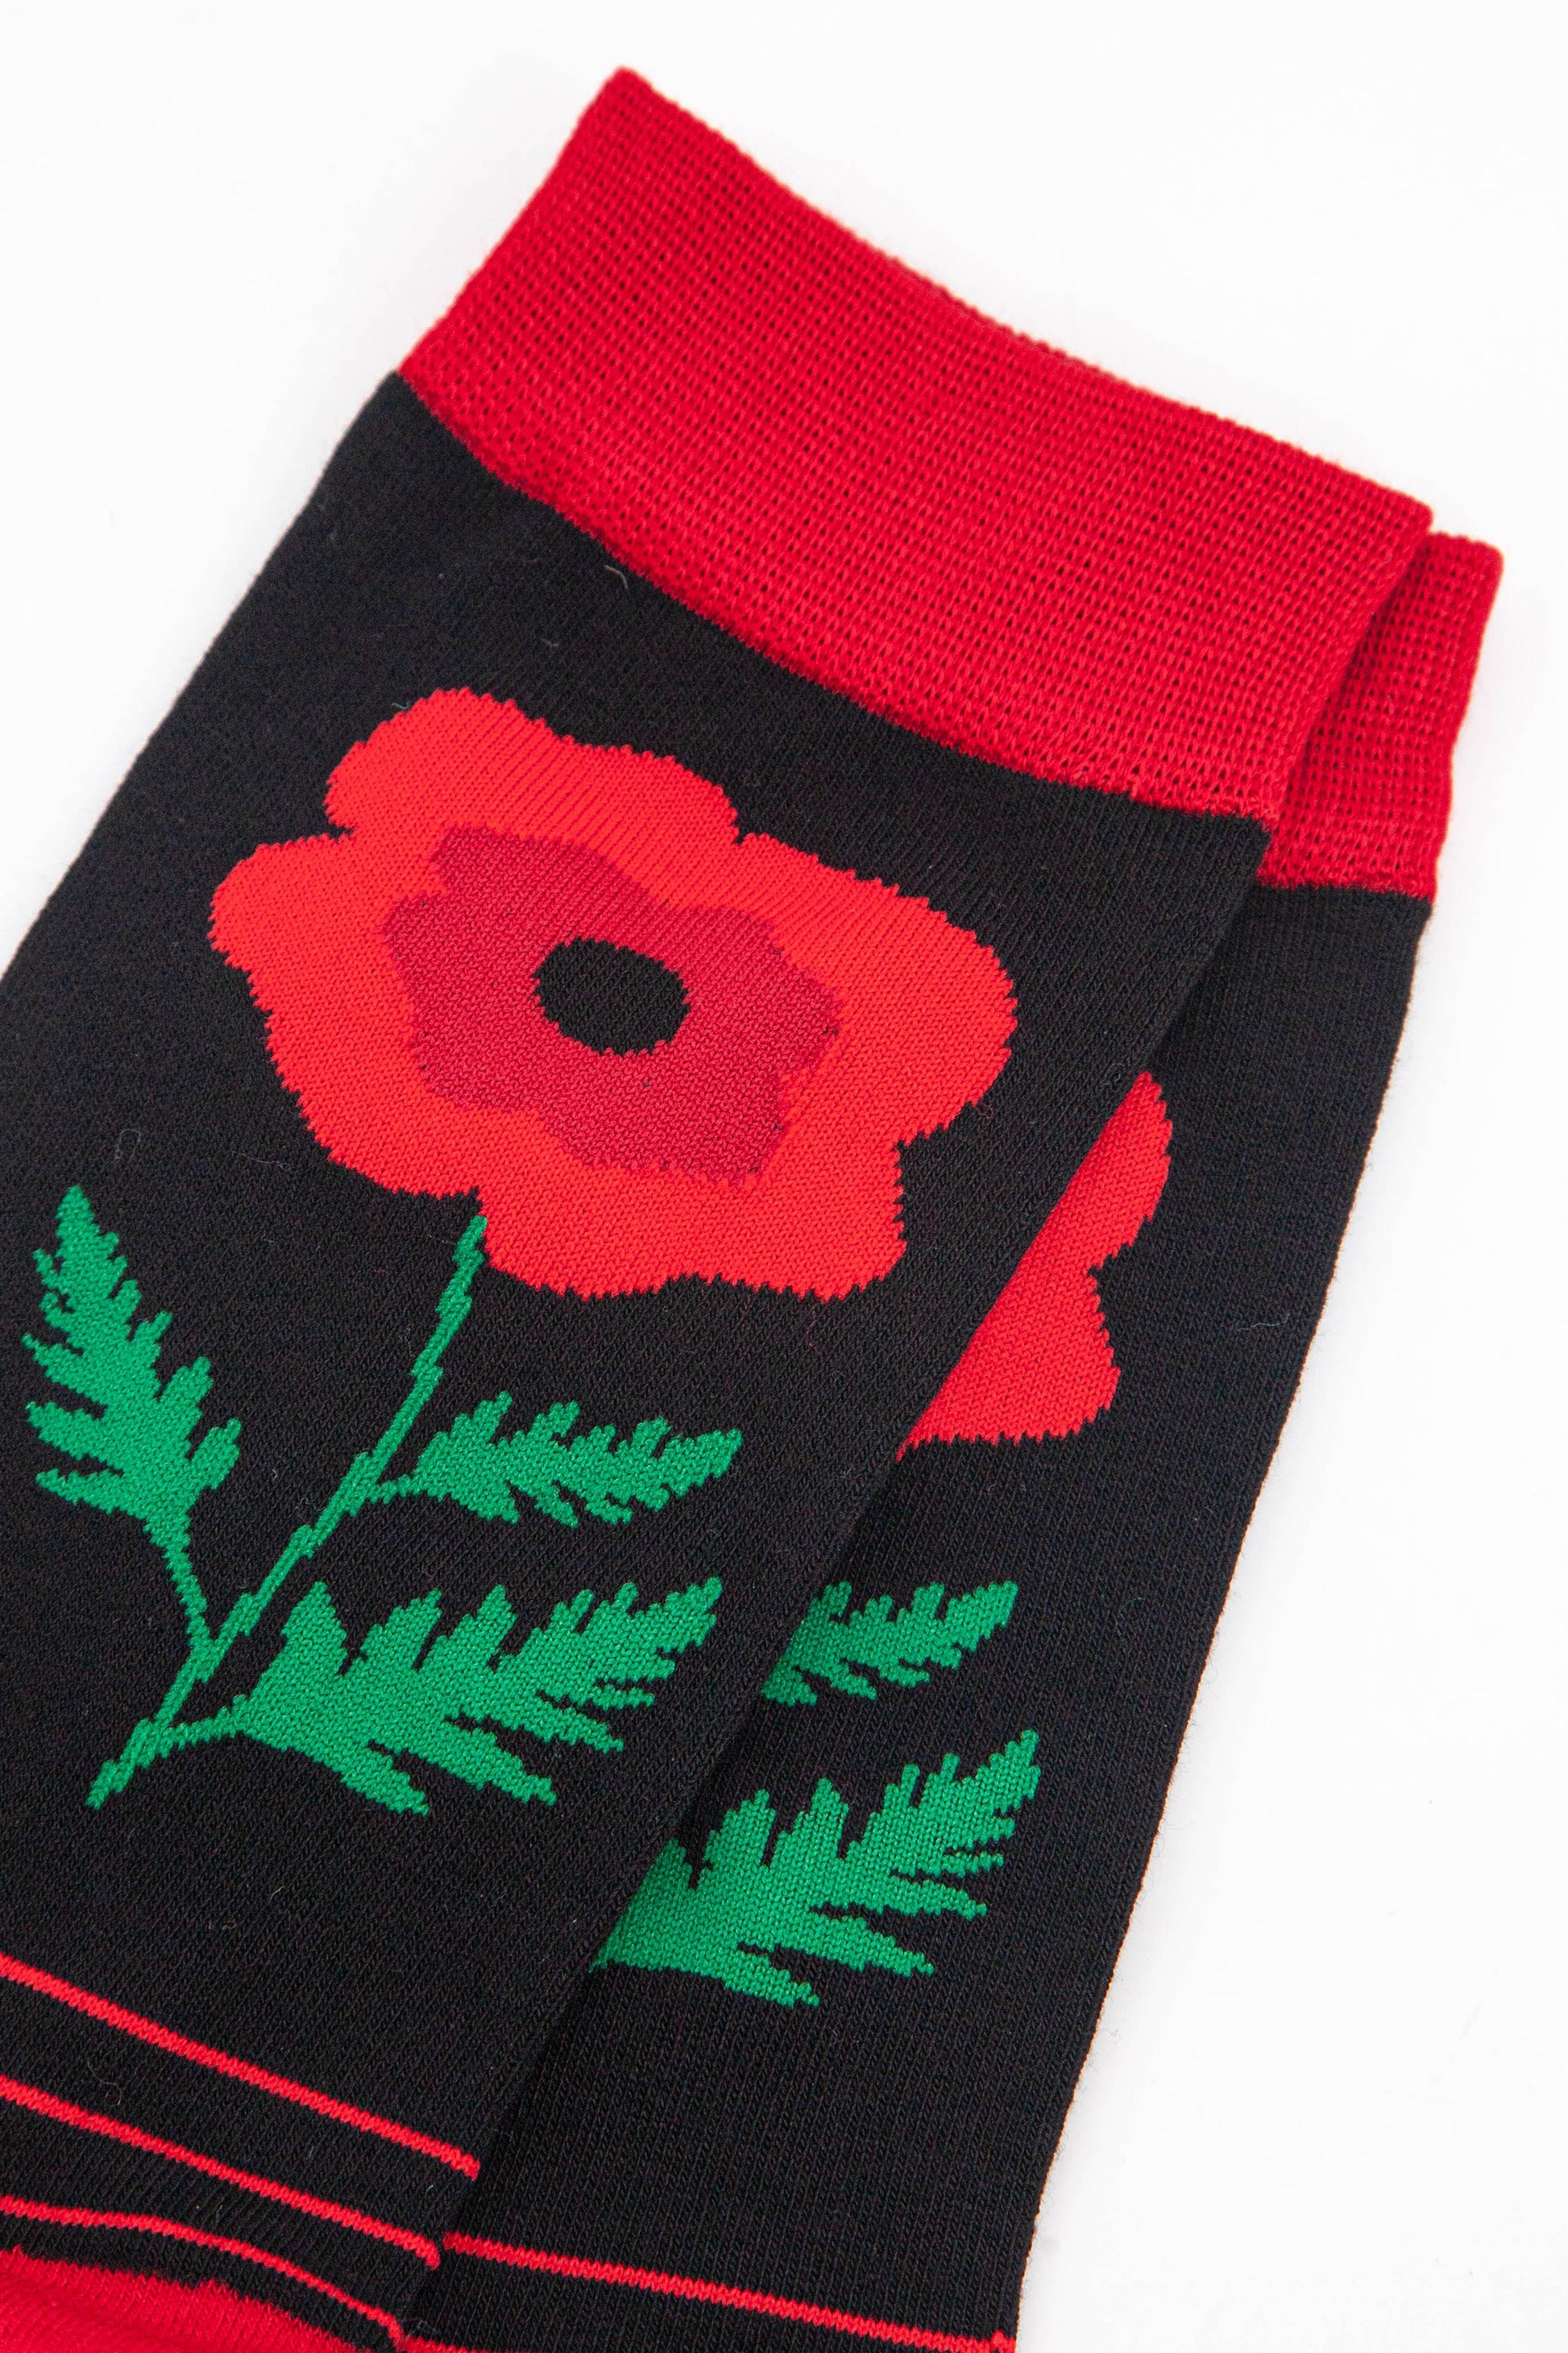 close up of the red poppy flower on the ankle of the socks